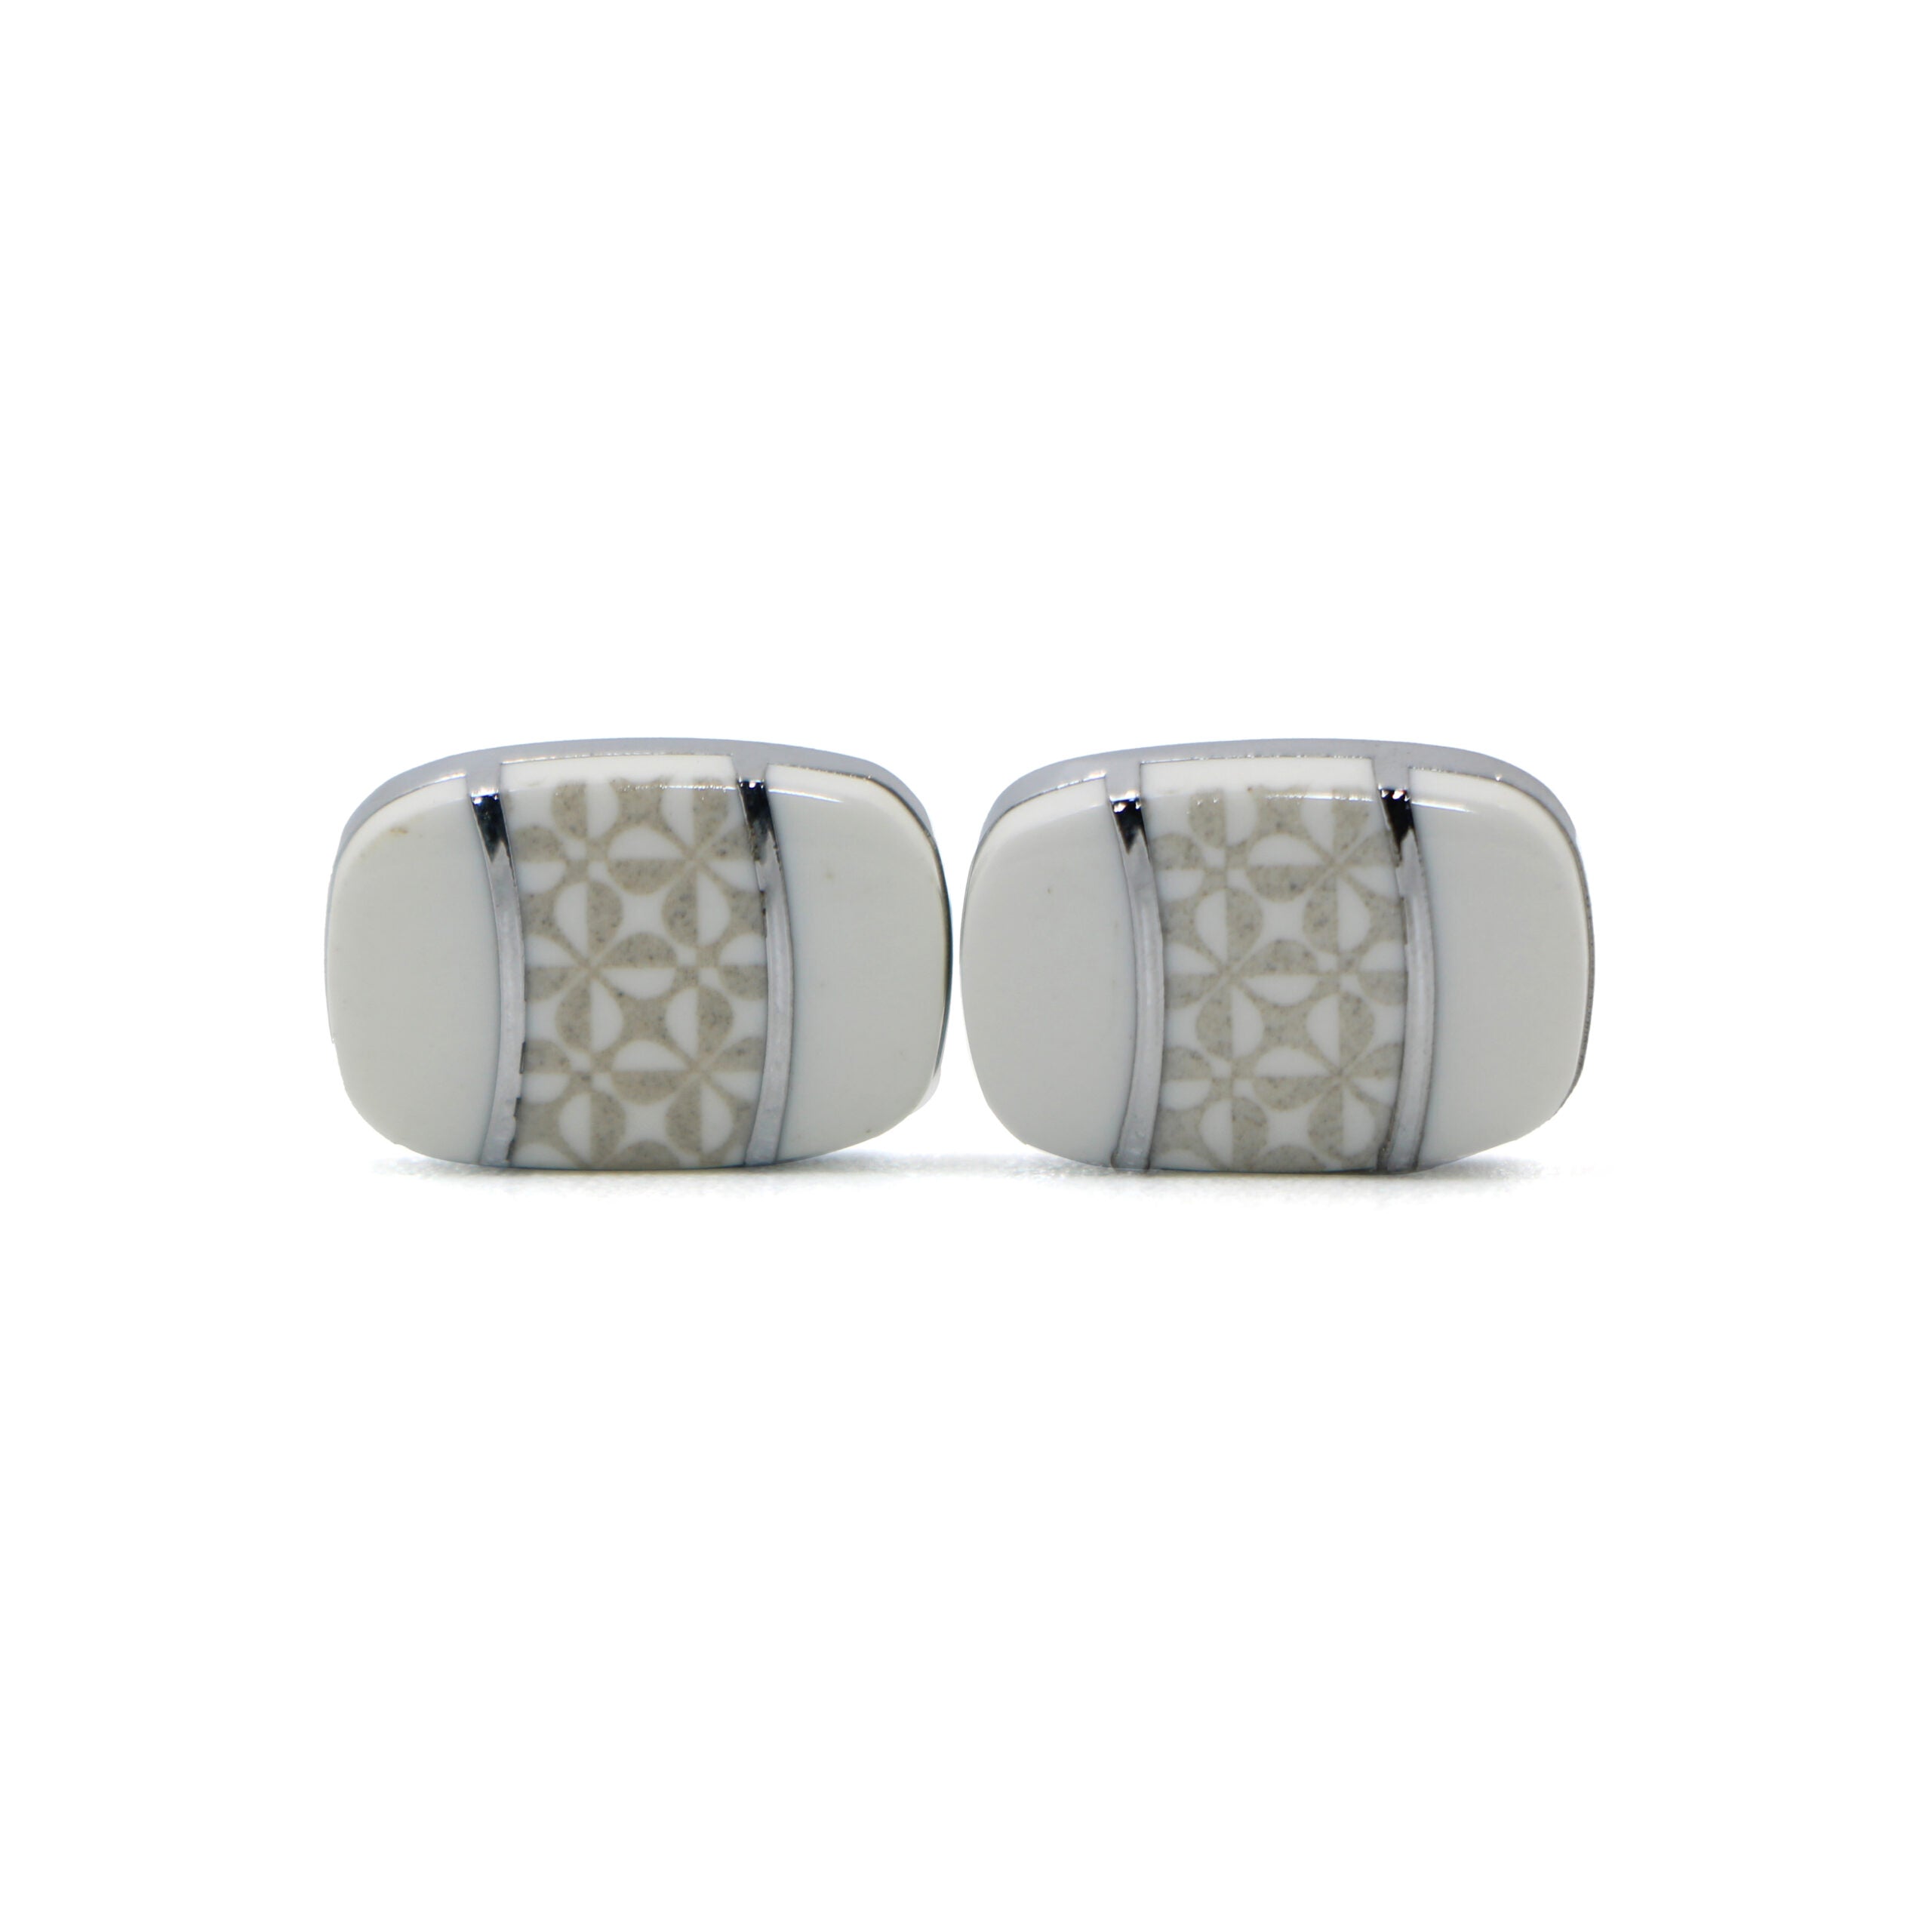 Vintage Cufflinks for Men's Shirt with a Gift Box - CU-1014